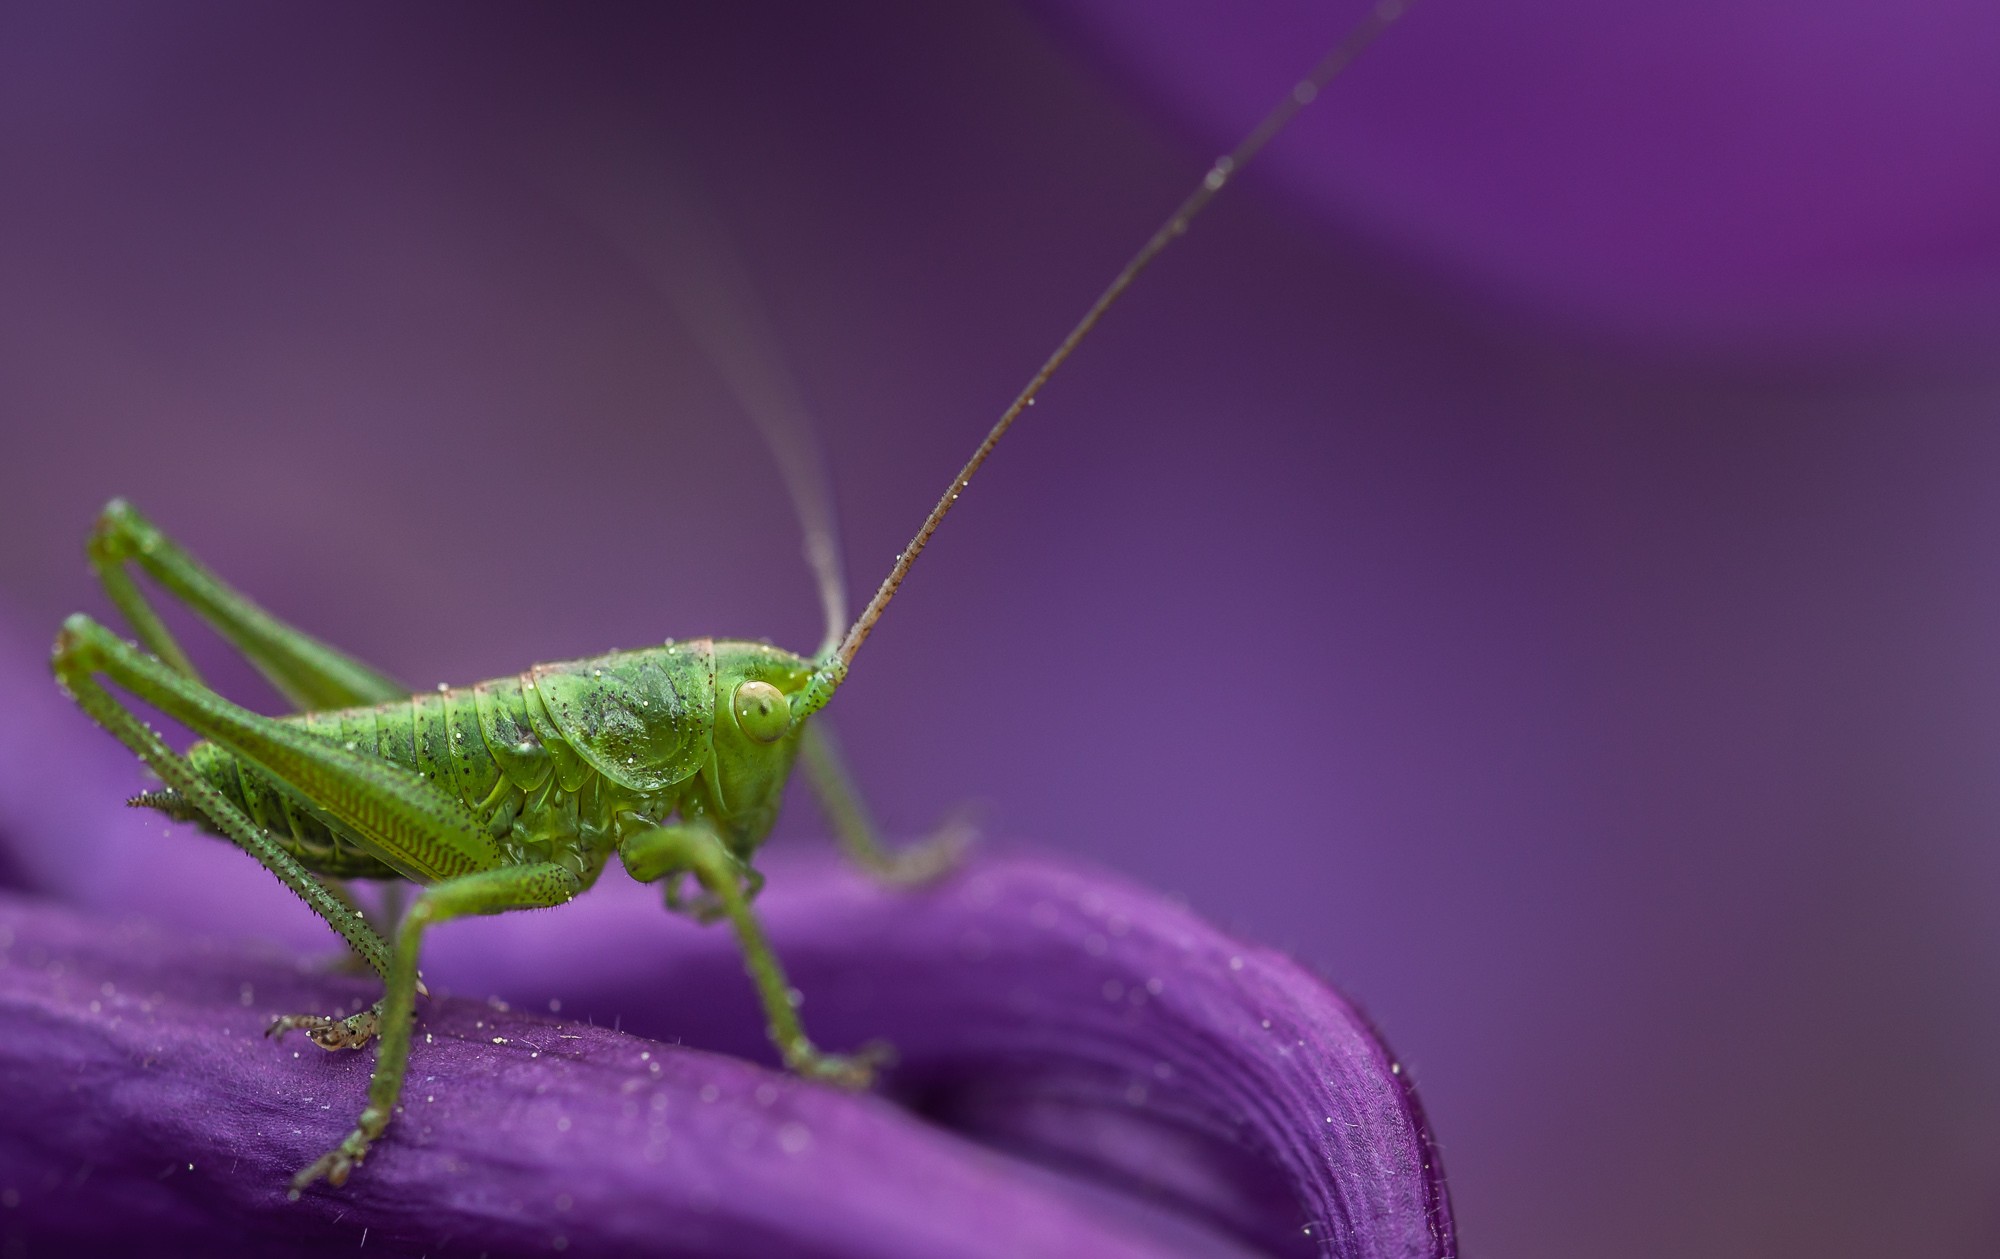 General 2000x1259 insect animals macro grasshopper nature purple background